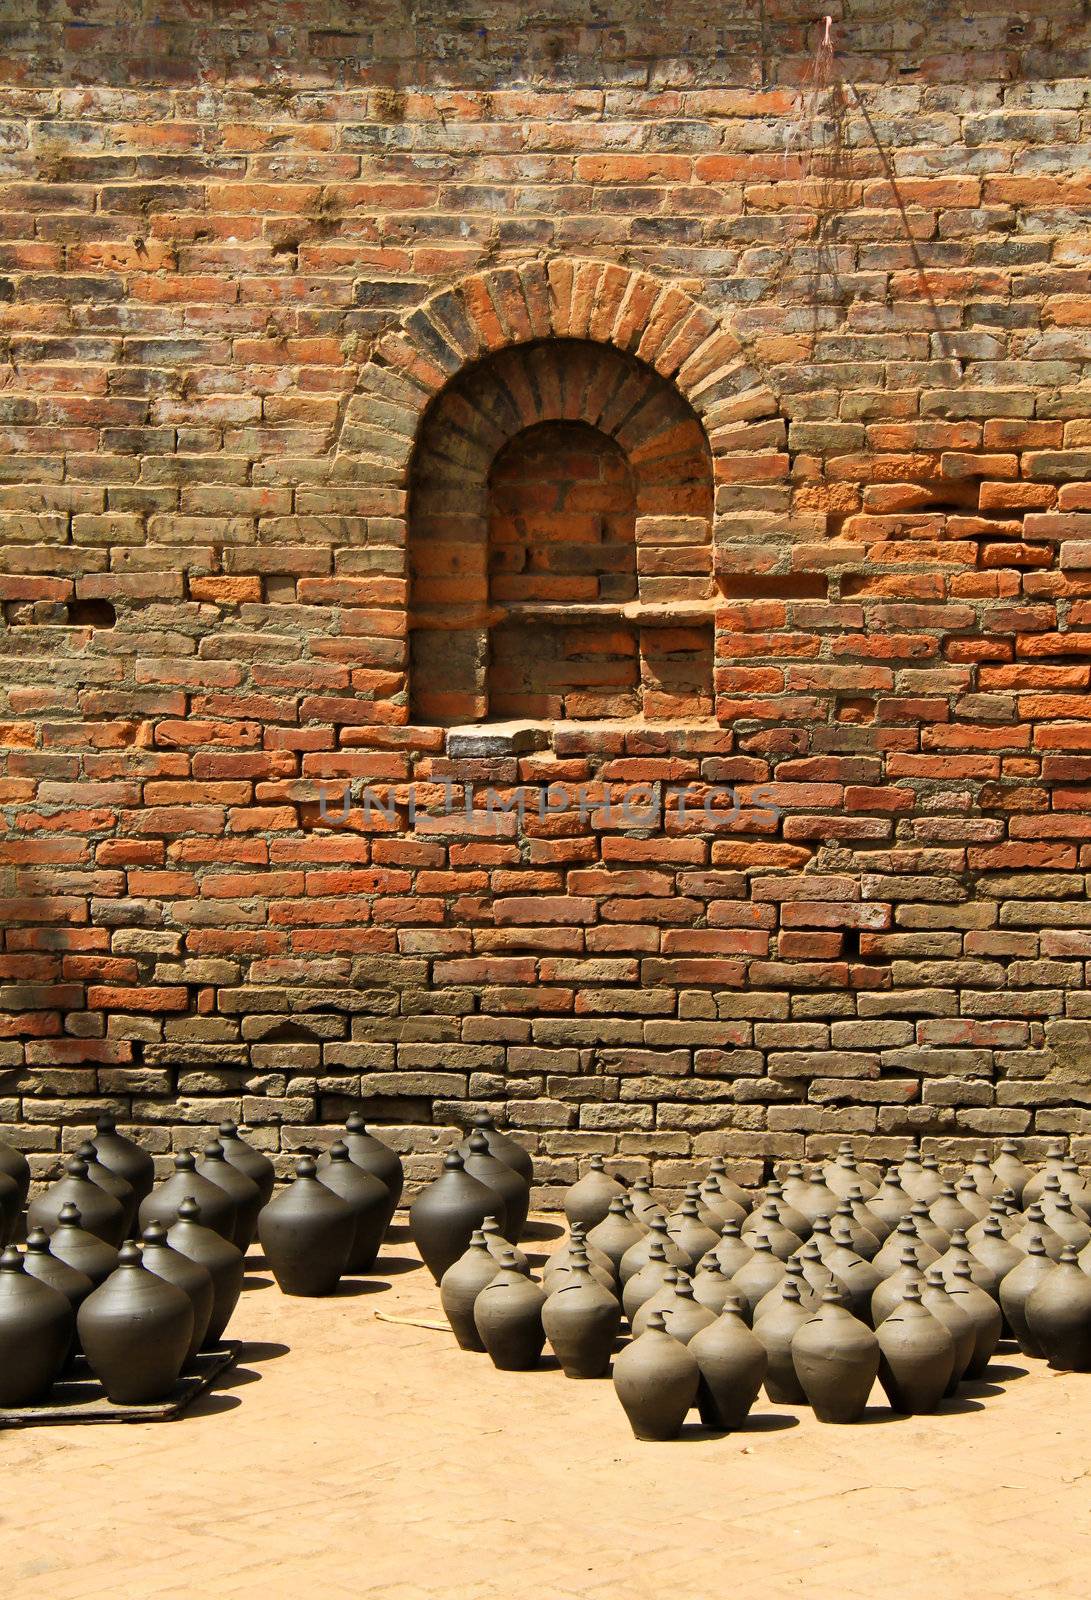 Many clay vases kept for drying with brick wall